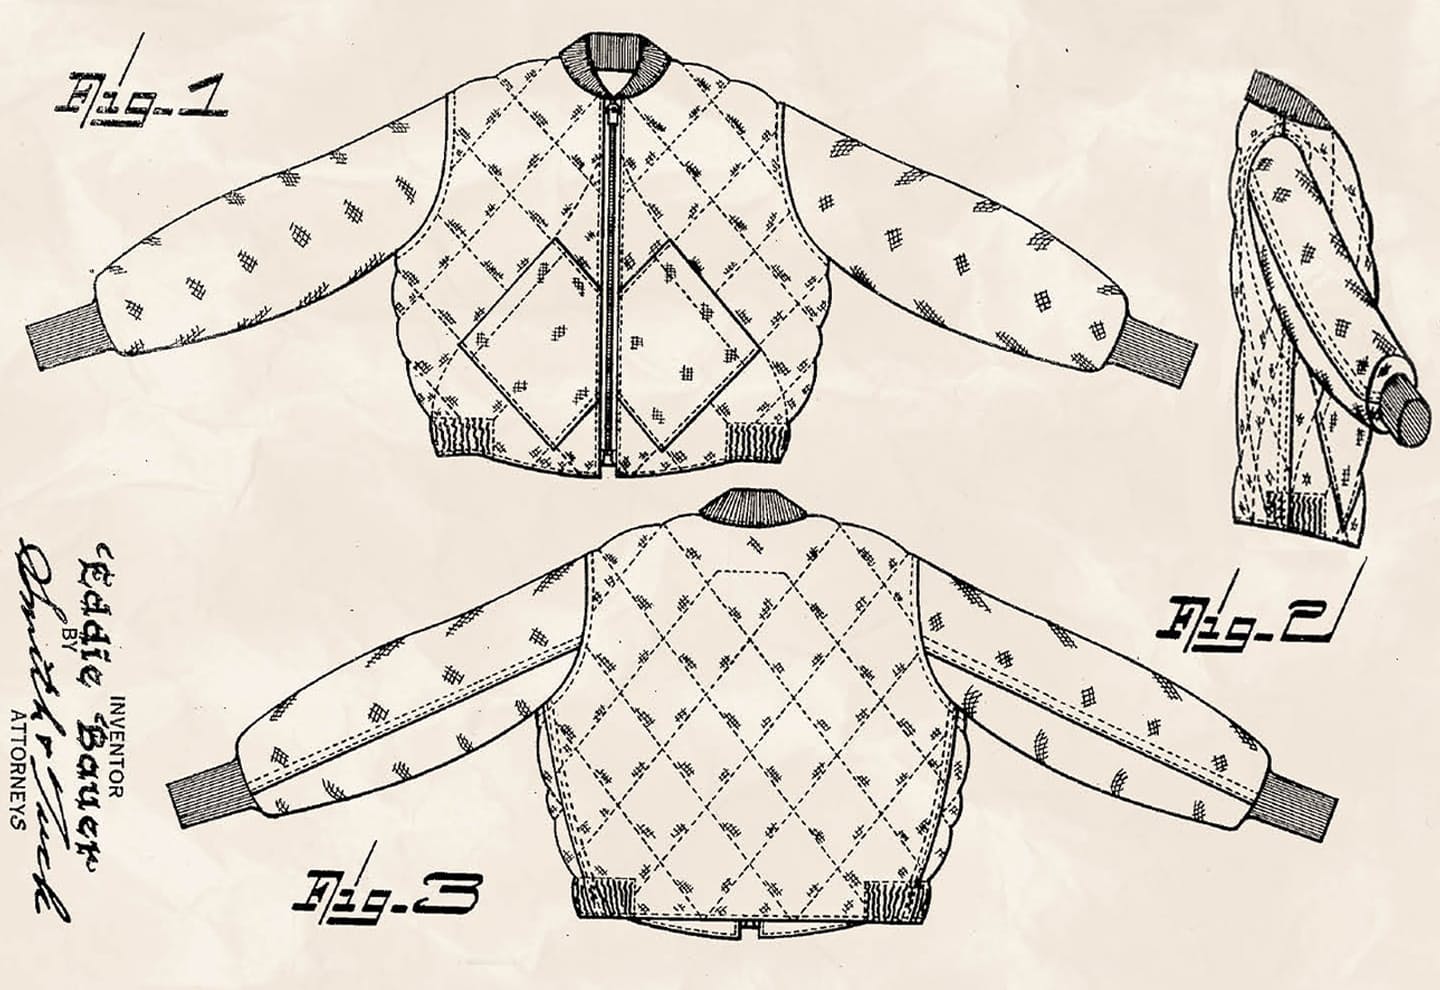 Vintage imagery of jacket